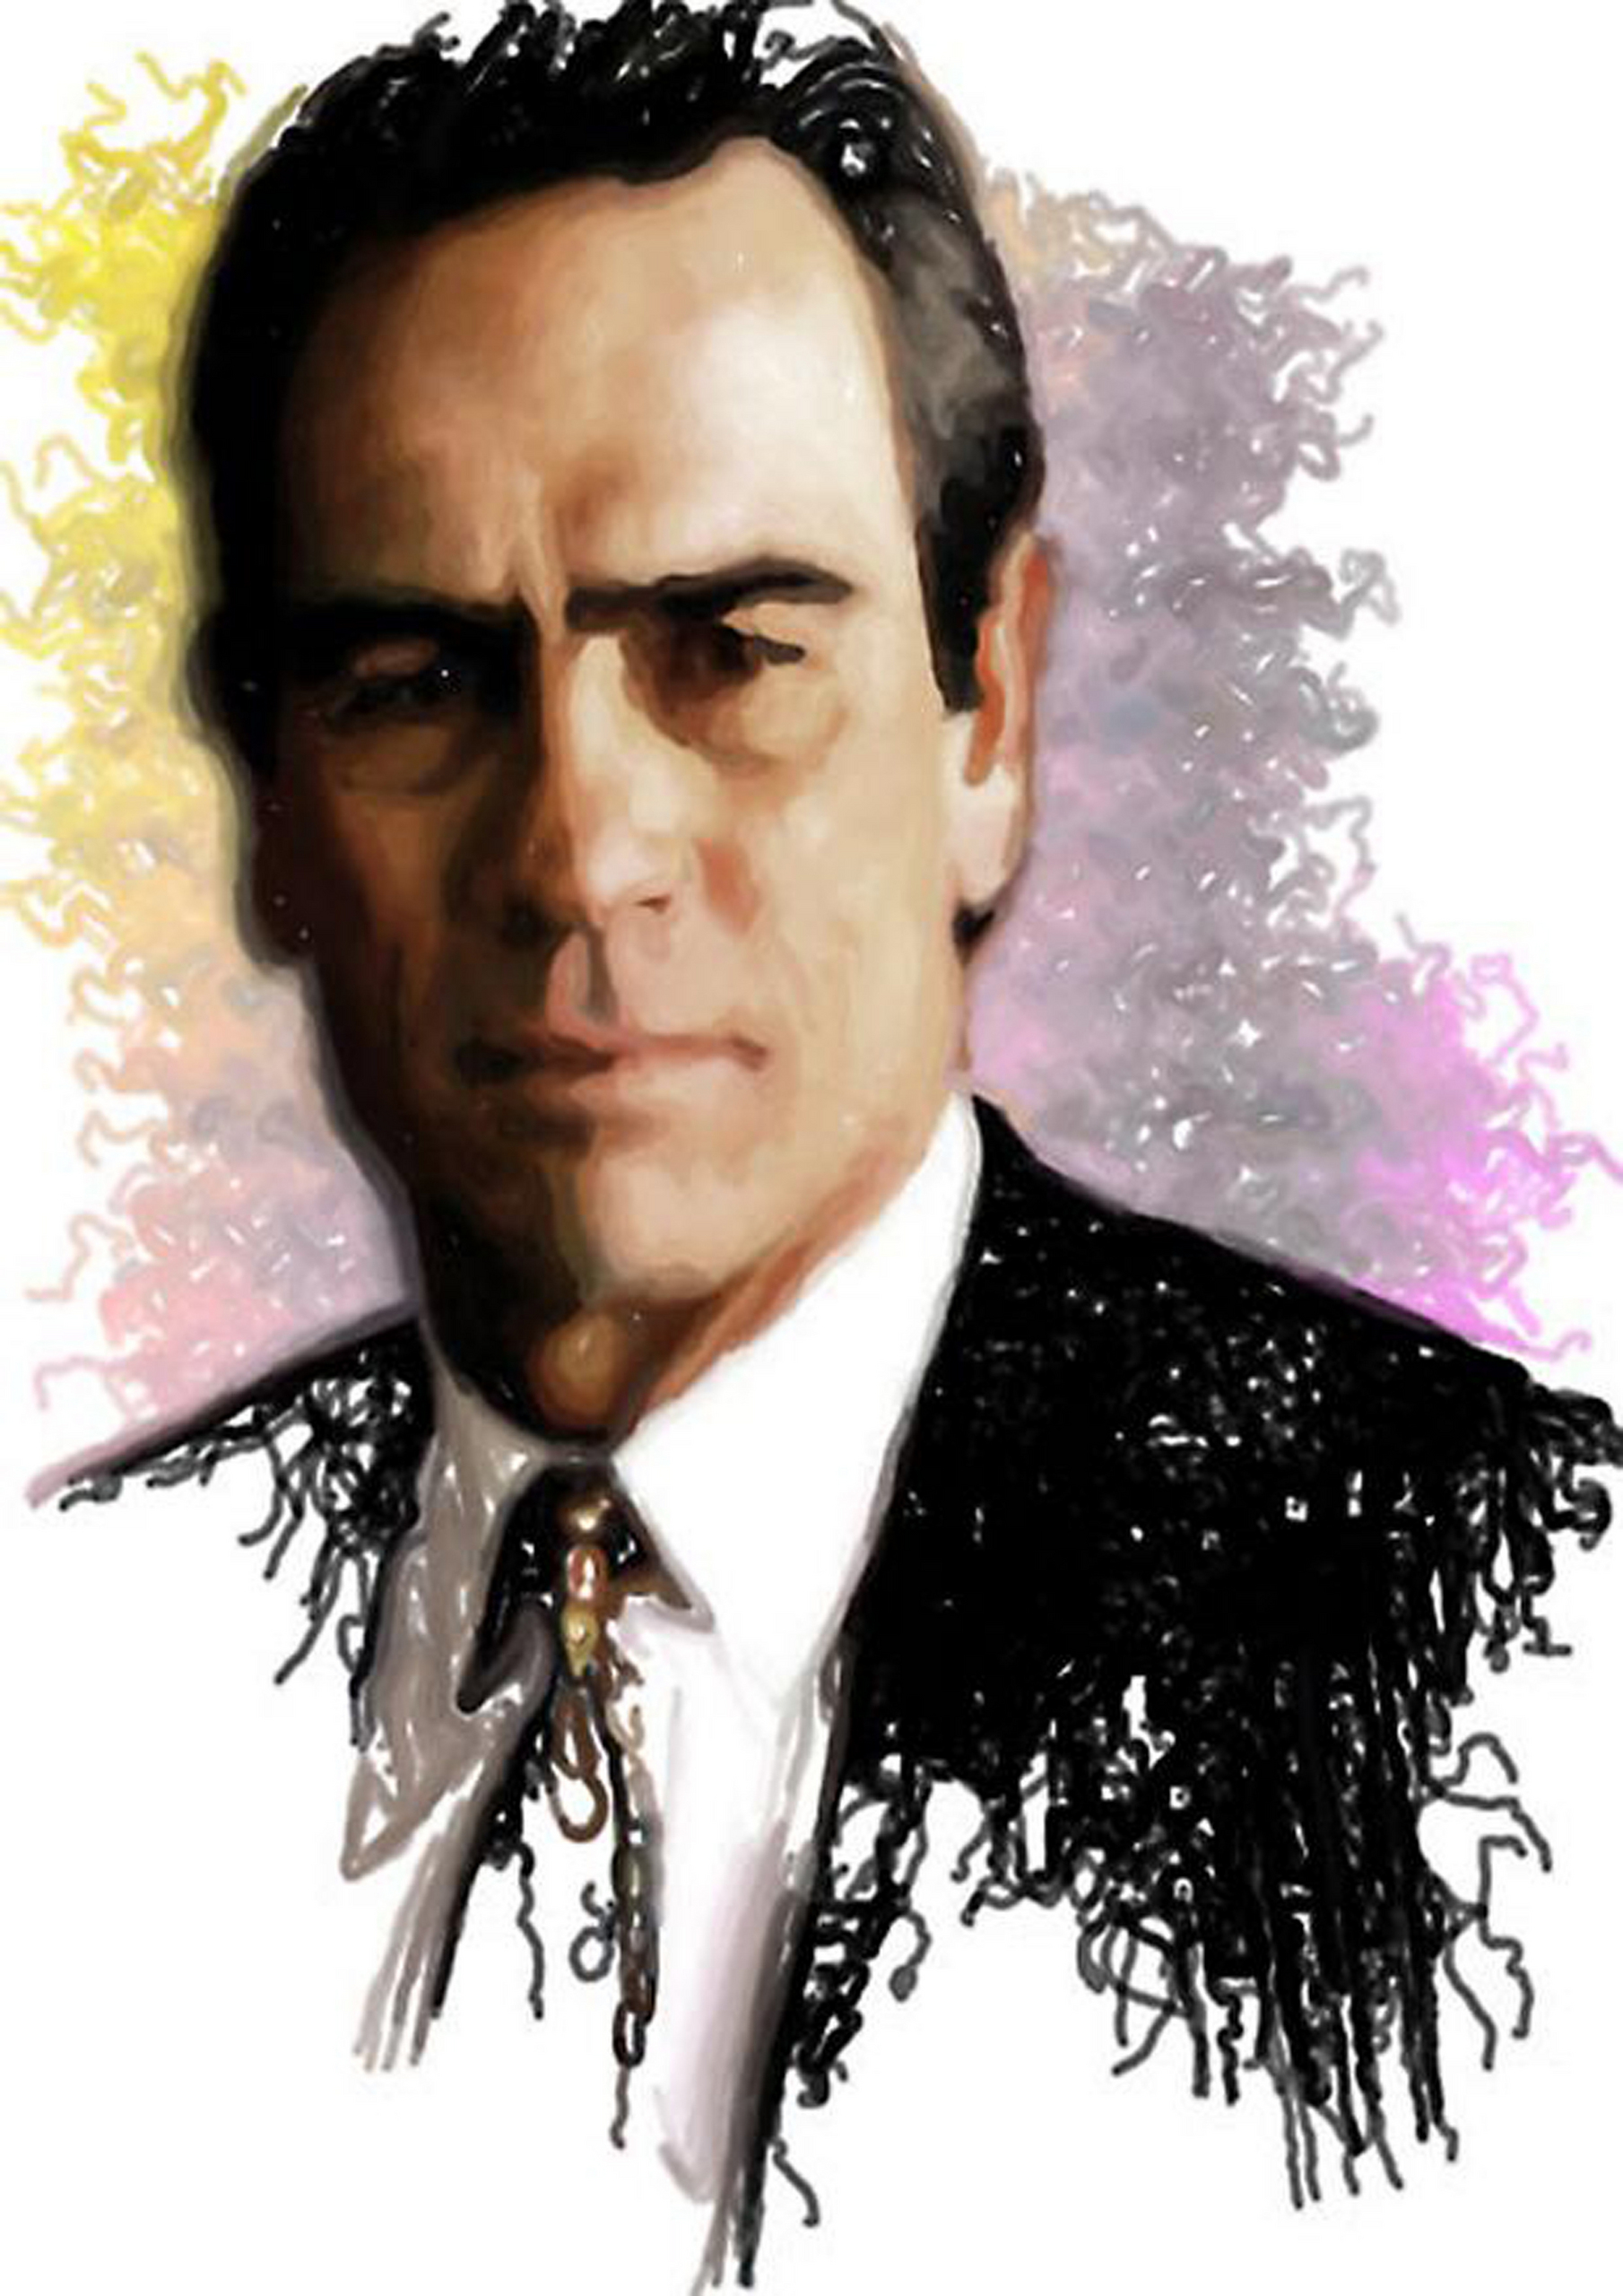 Tommy Lee Jones Image HD Wallpaper And Background